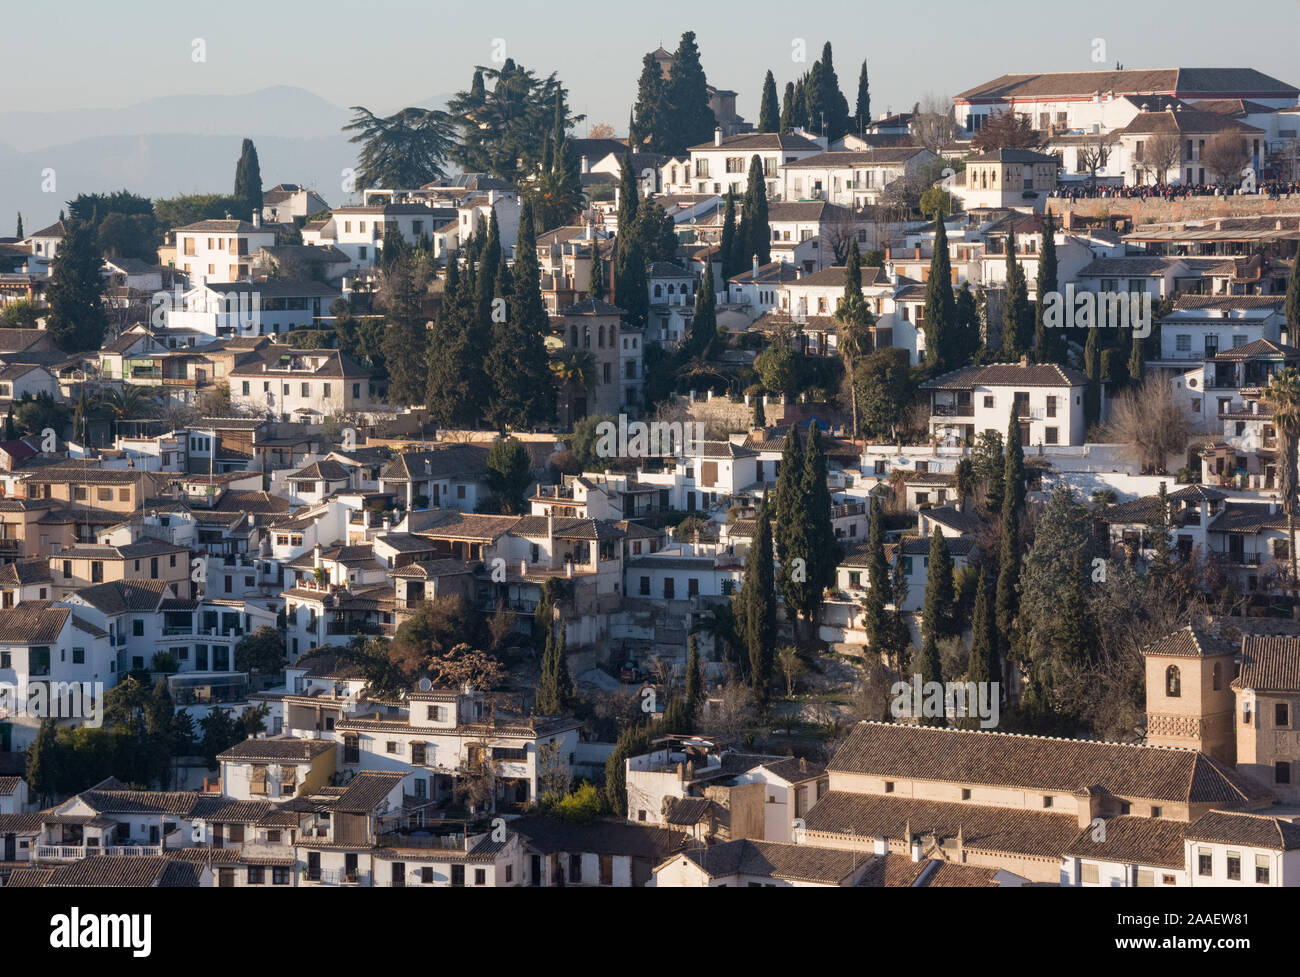 A view of the city of Granada from the Alhambra palace complex, Andalusia, Spain on a beautiful hazy winter's day Stock Photo